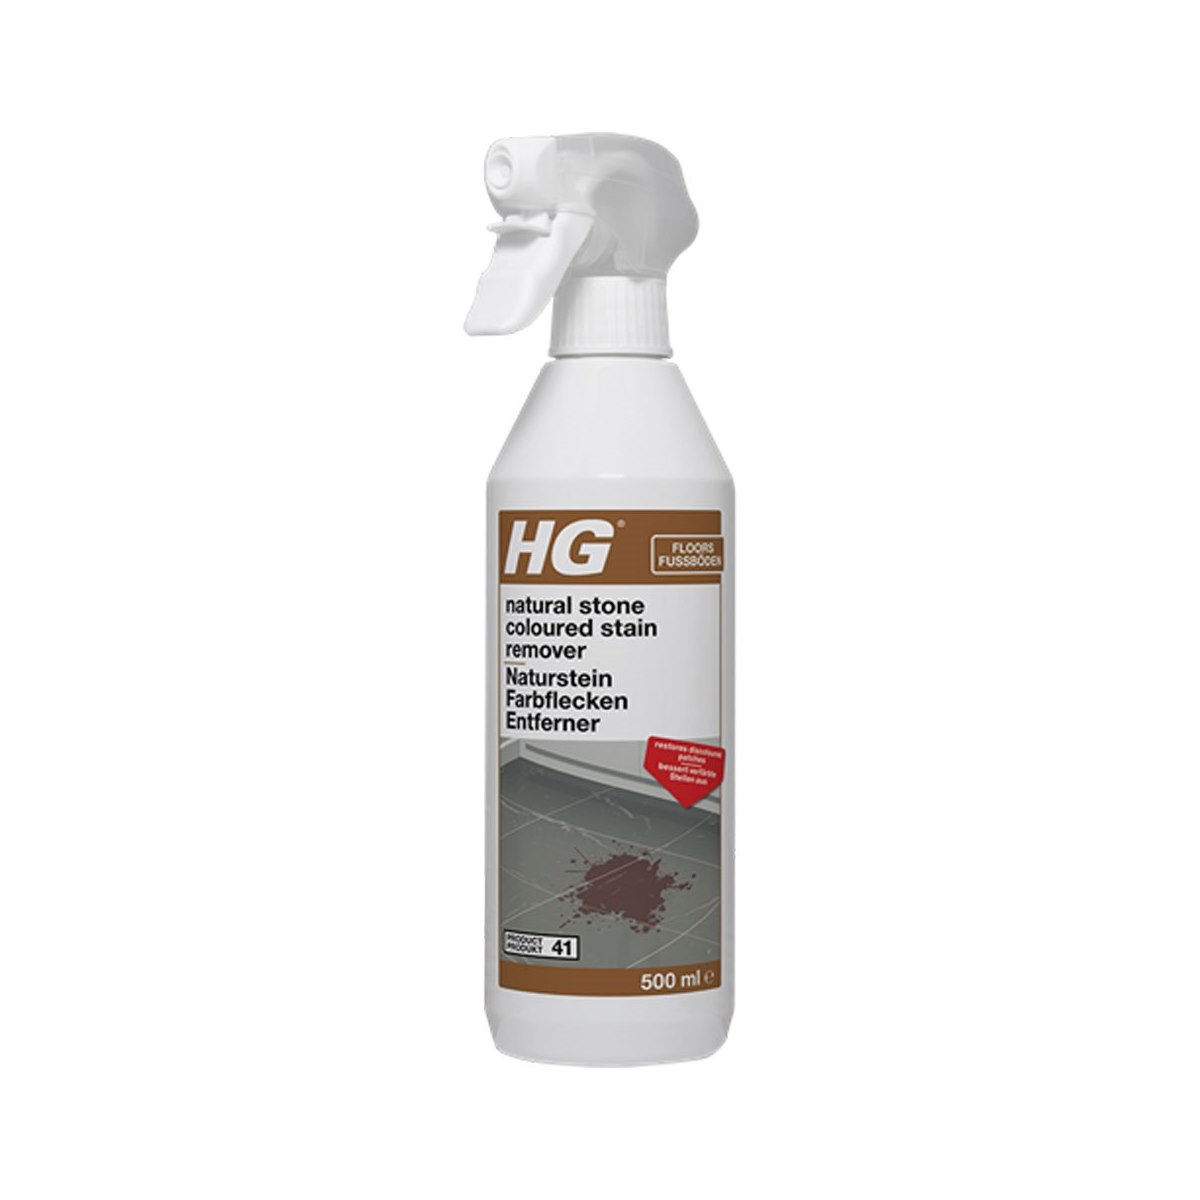 HG Natural Stone Coloured Stain Remover 500ml